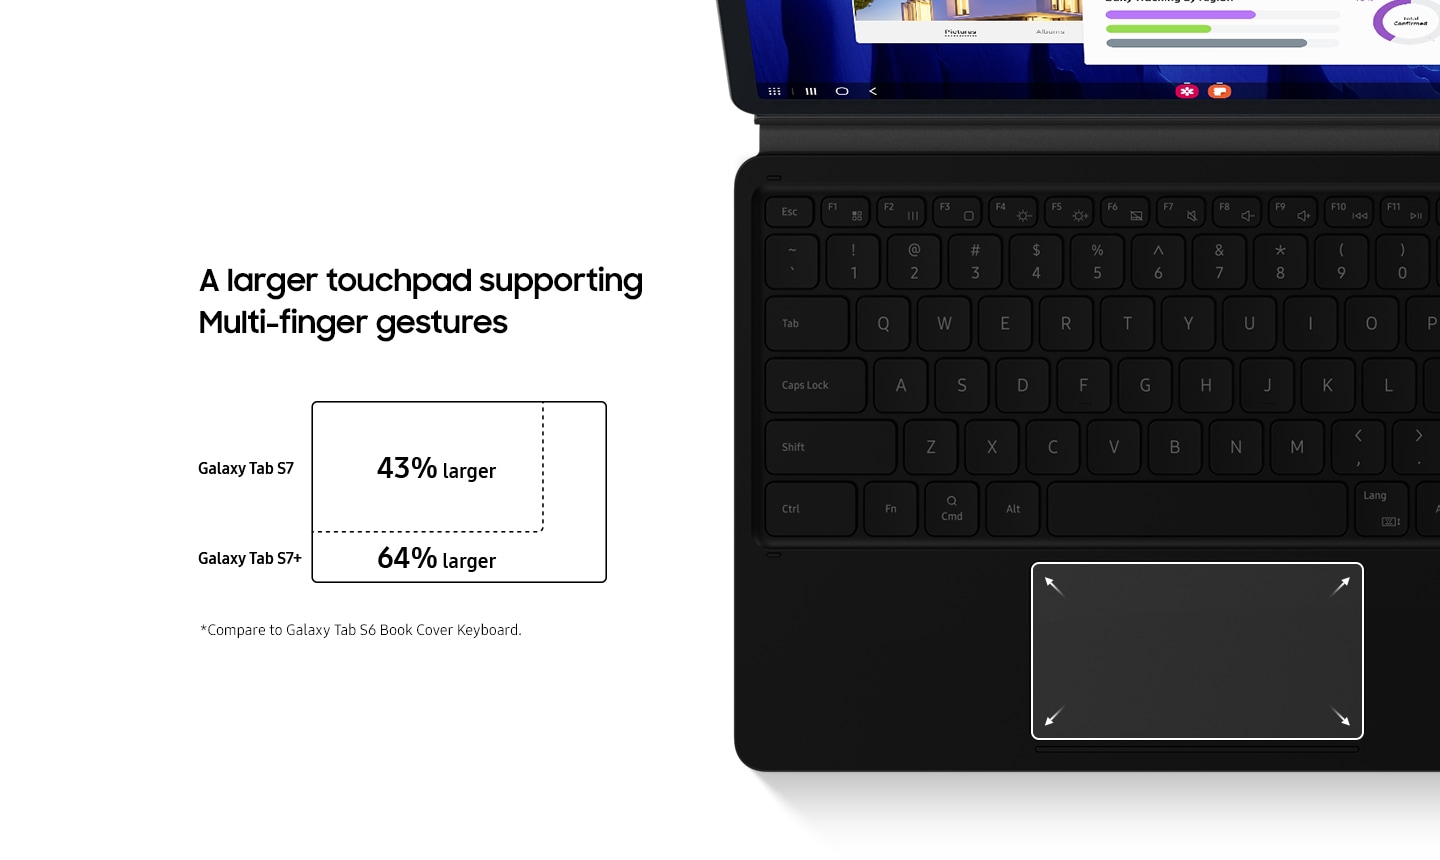 Galaxy Tab S7+ with Book Cover Keyboard's touchpad highlighted. Touchpad is over 40% larger, supporting multi-finger gesture.